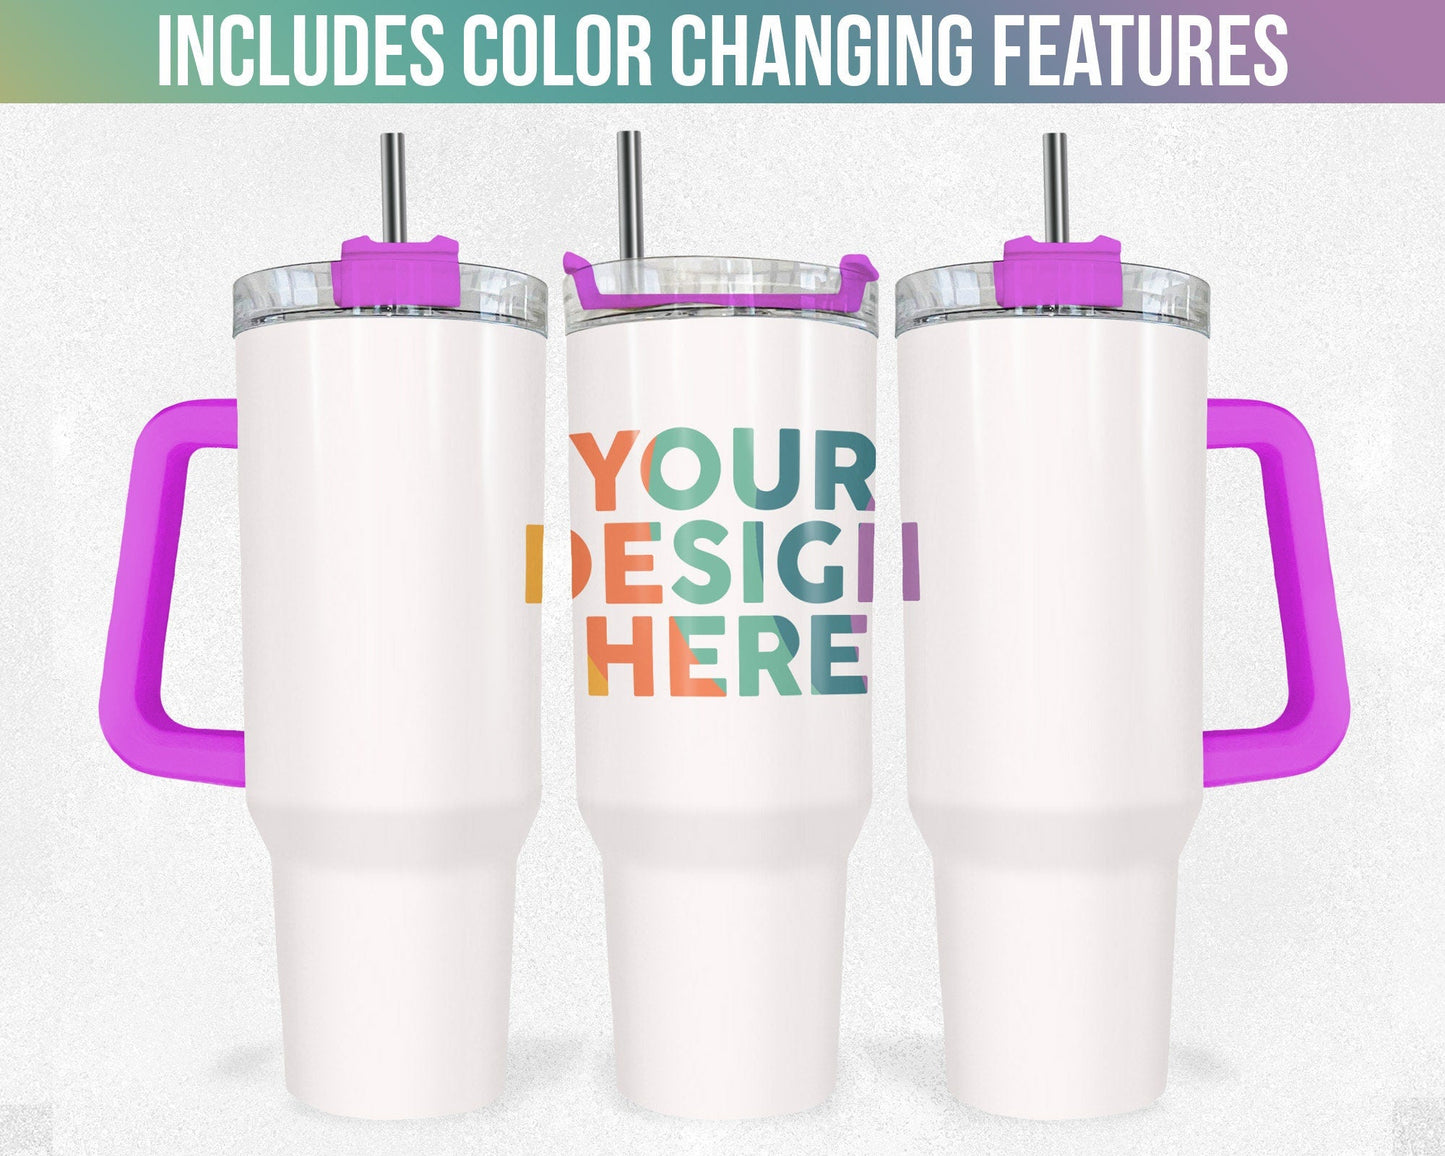 40 oz Tumbler Smart Object Mockup, Photoshop Mock-up, Photopea Mockup, Full View Wrap, Add Your Own Image, Add Own Background - VartDigitals